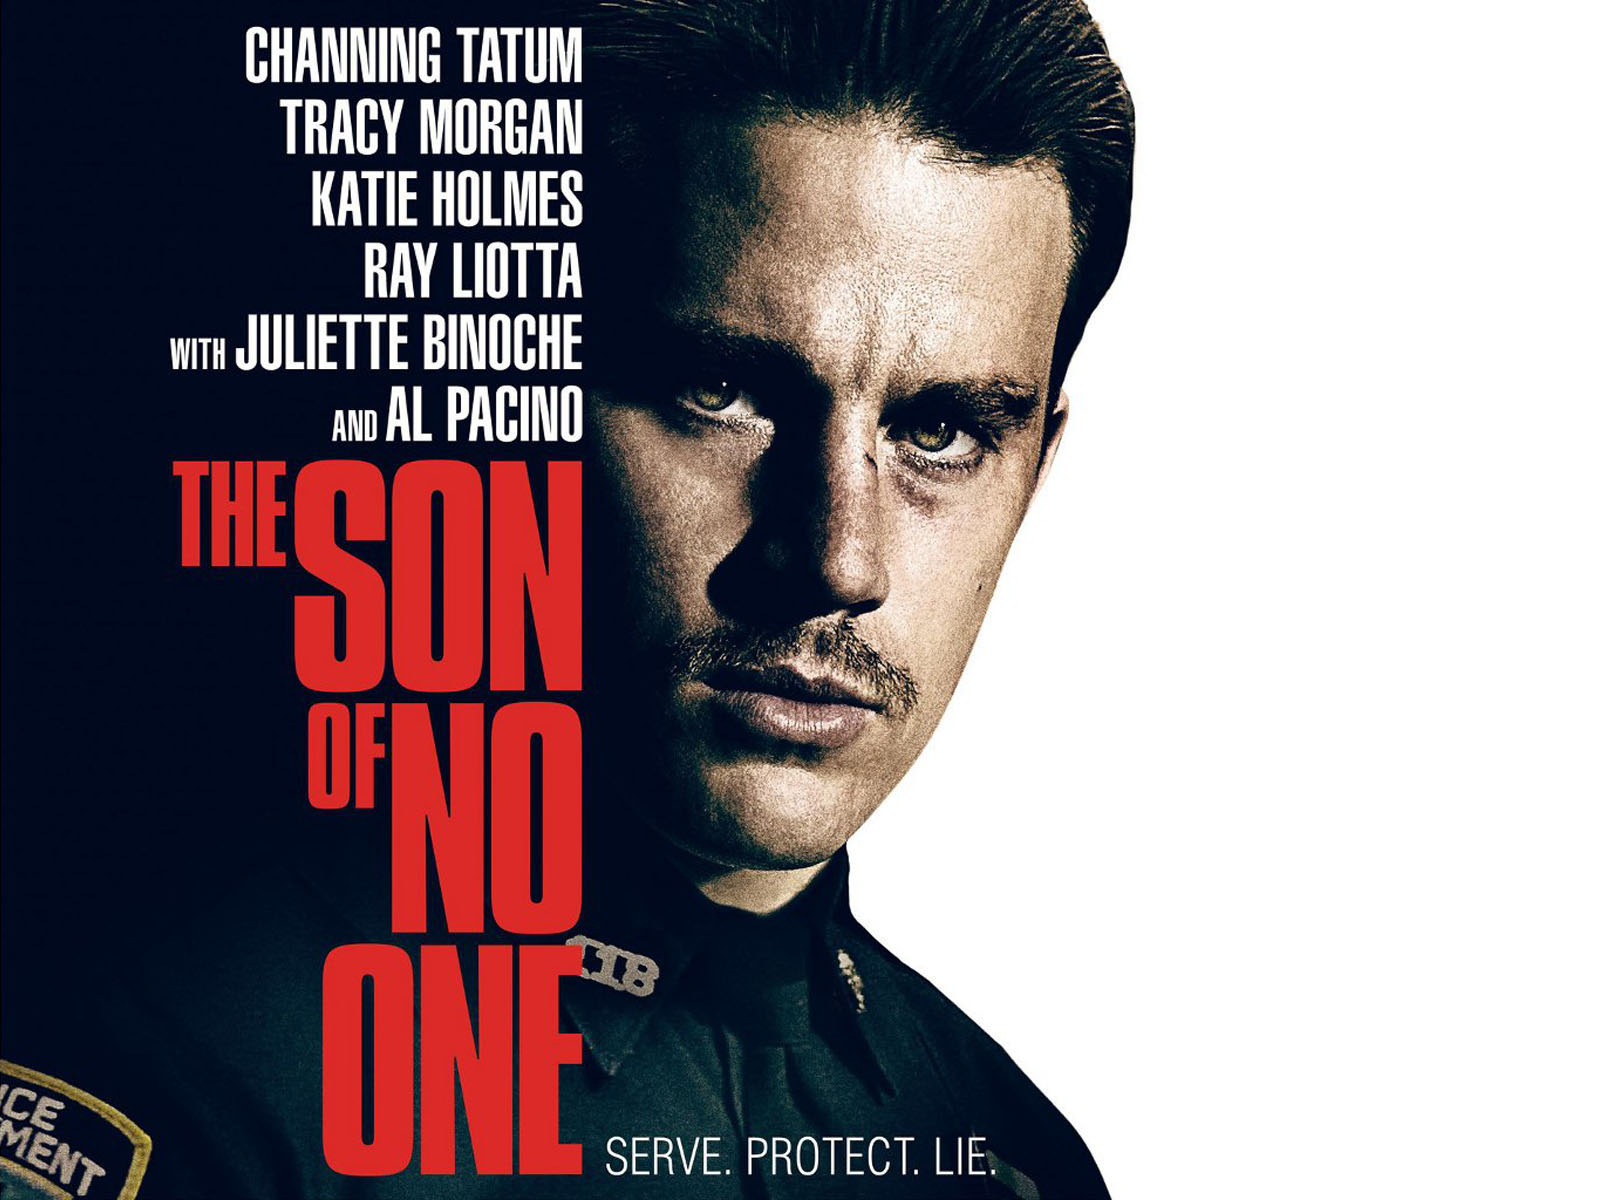 the-son-of-no-one-poster_152895-1600x1200_1.jpg